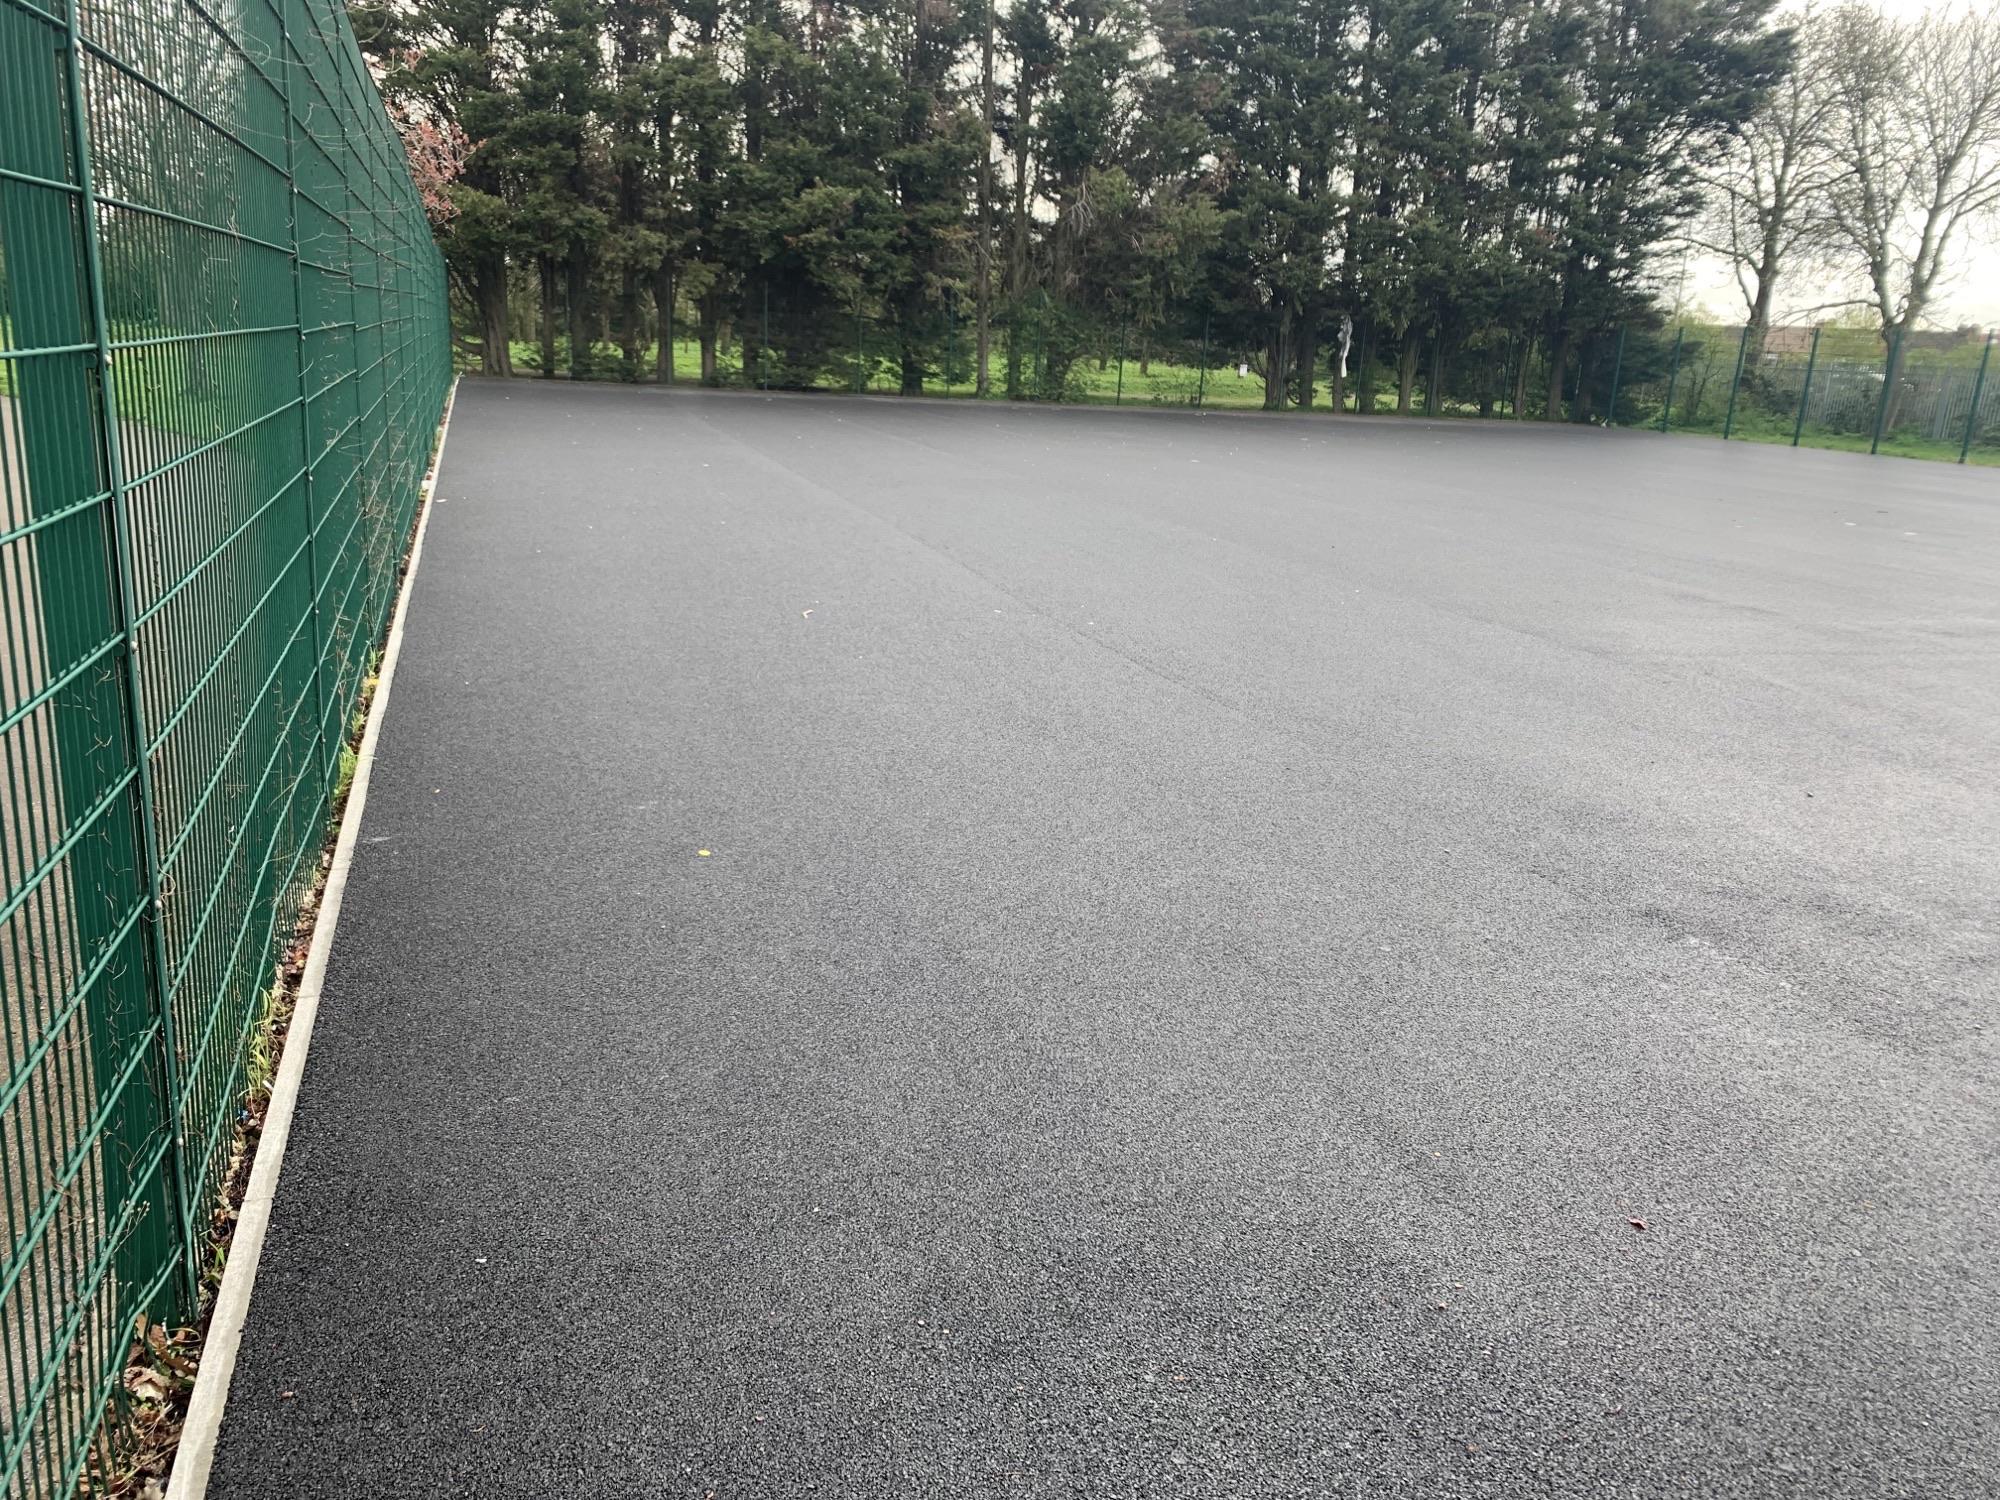 New tennis court surface at Byron Park